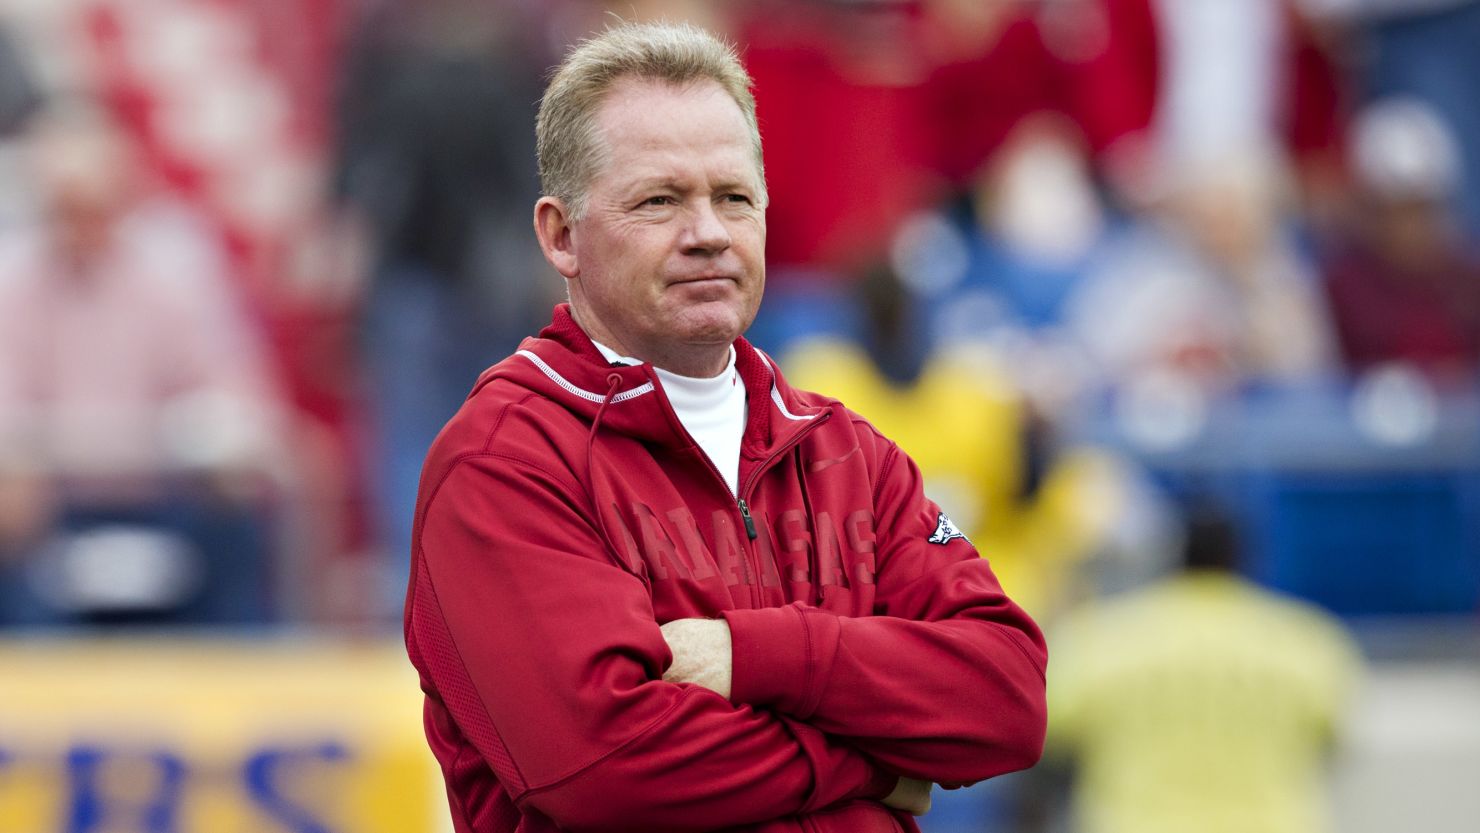 Bobby Petrino was fired as Arkansas head football coach after failing to reveal a relationship with a female member of his staff.